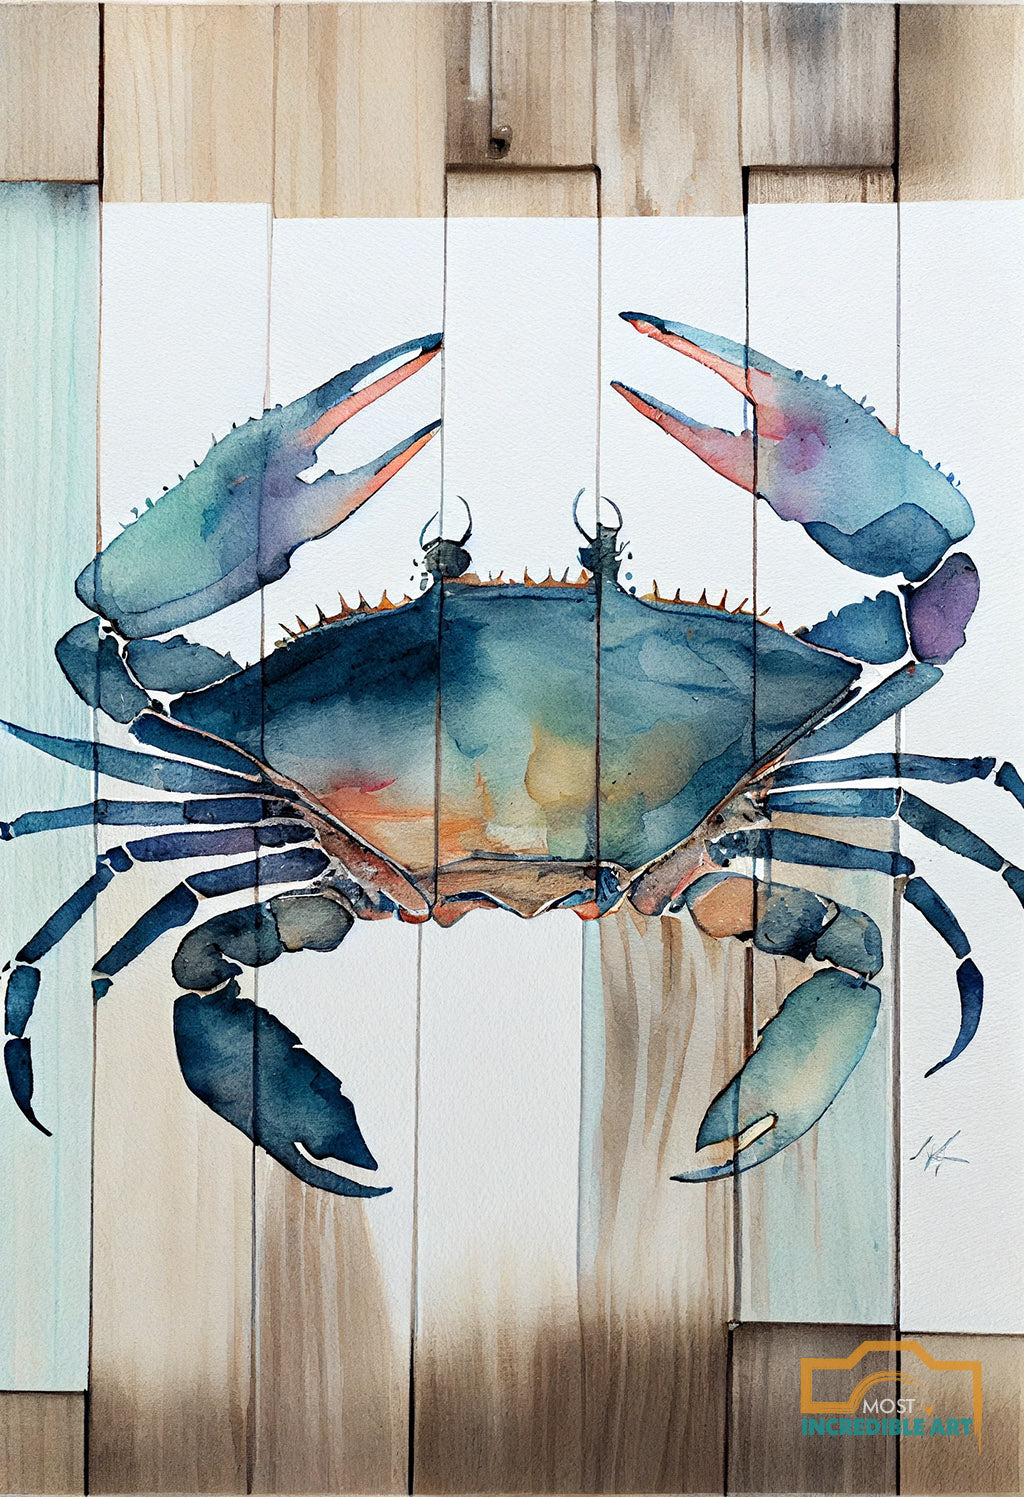 Watercolor Blue Crab on Wood Planks Nautical Theme - Wall Art